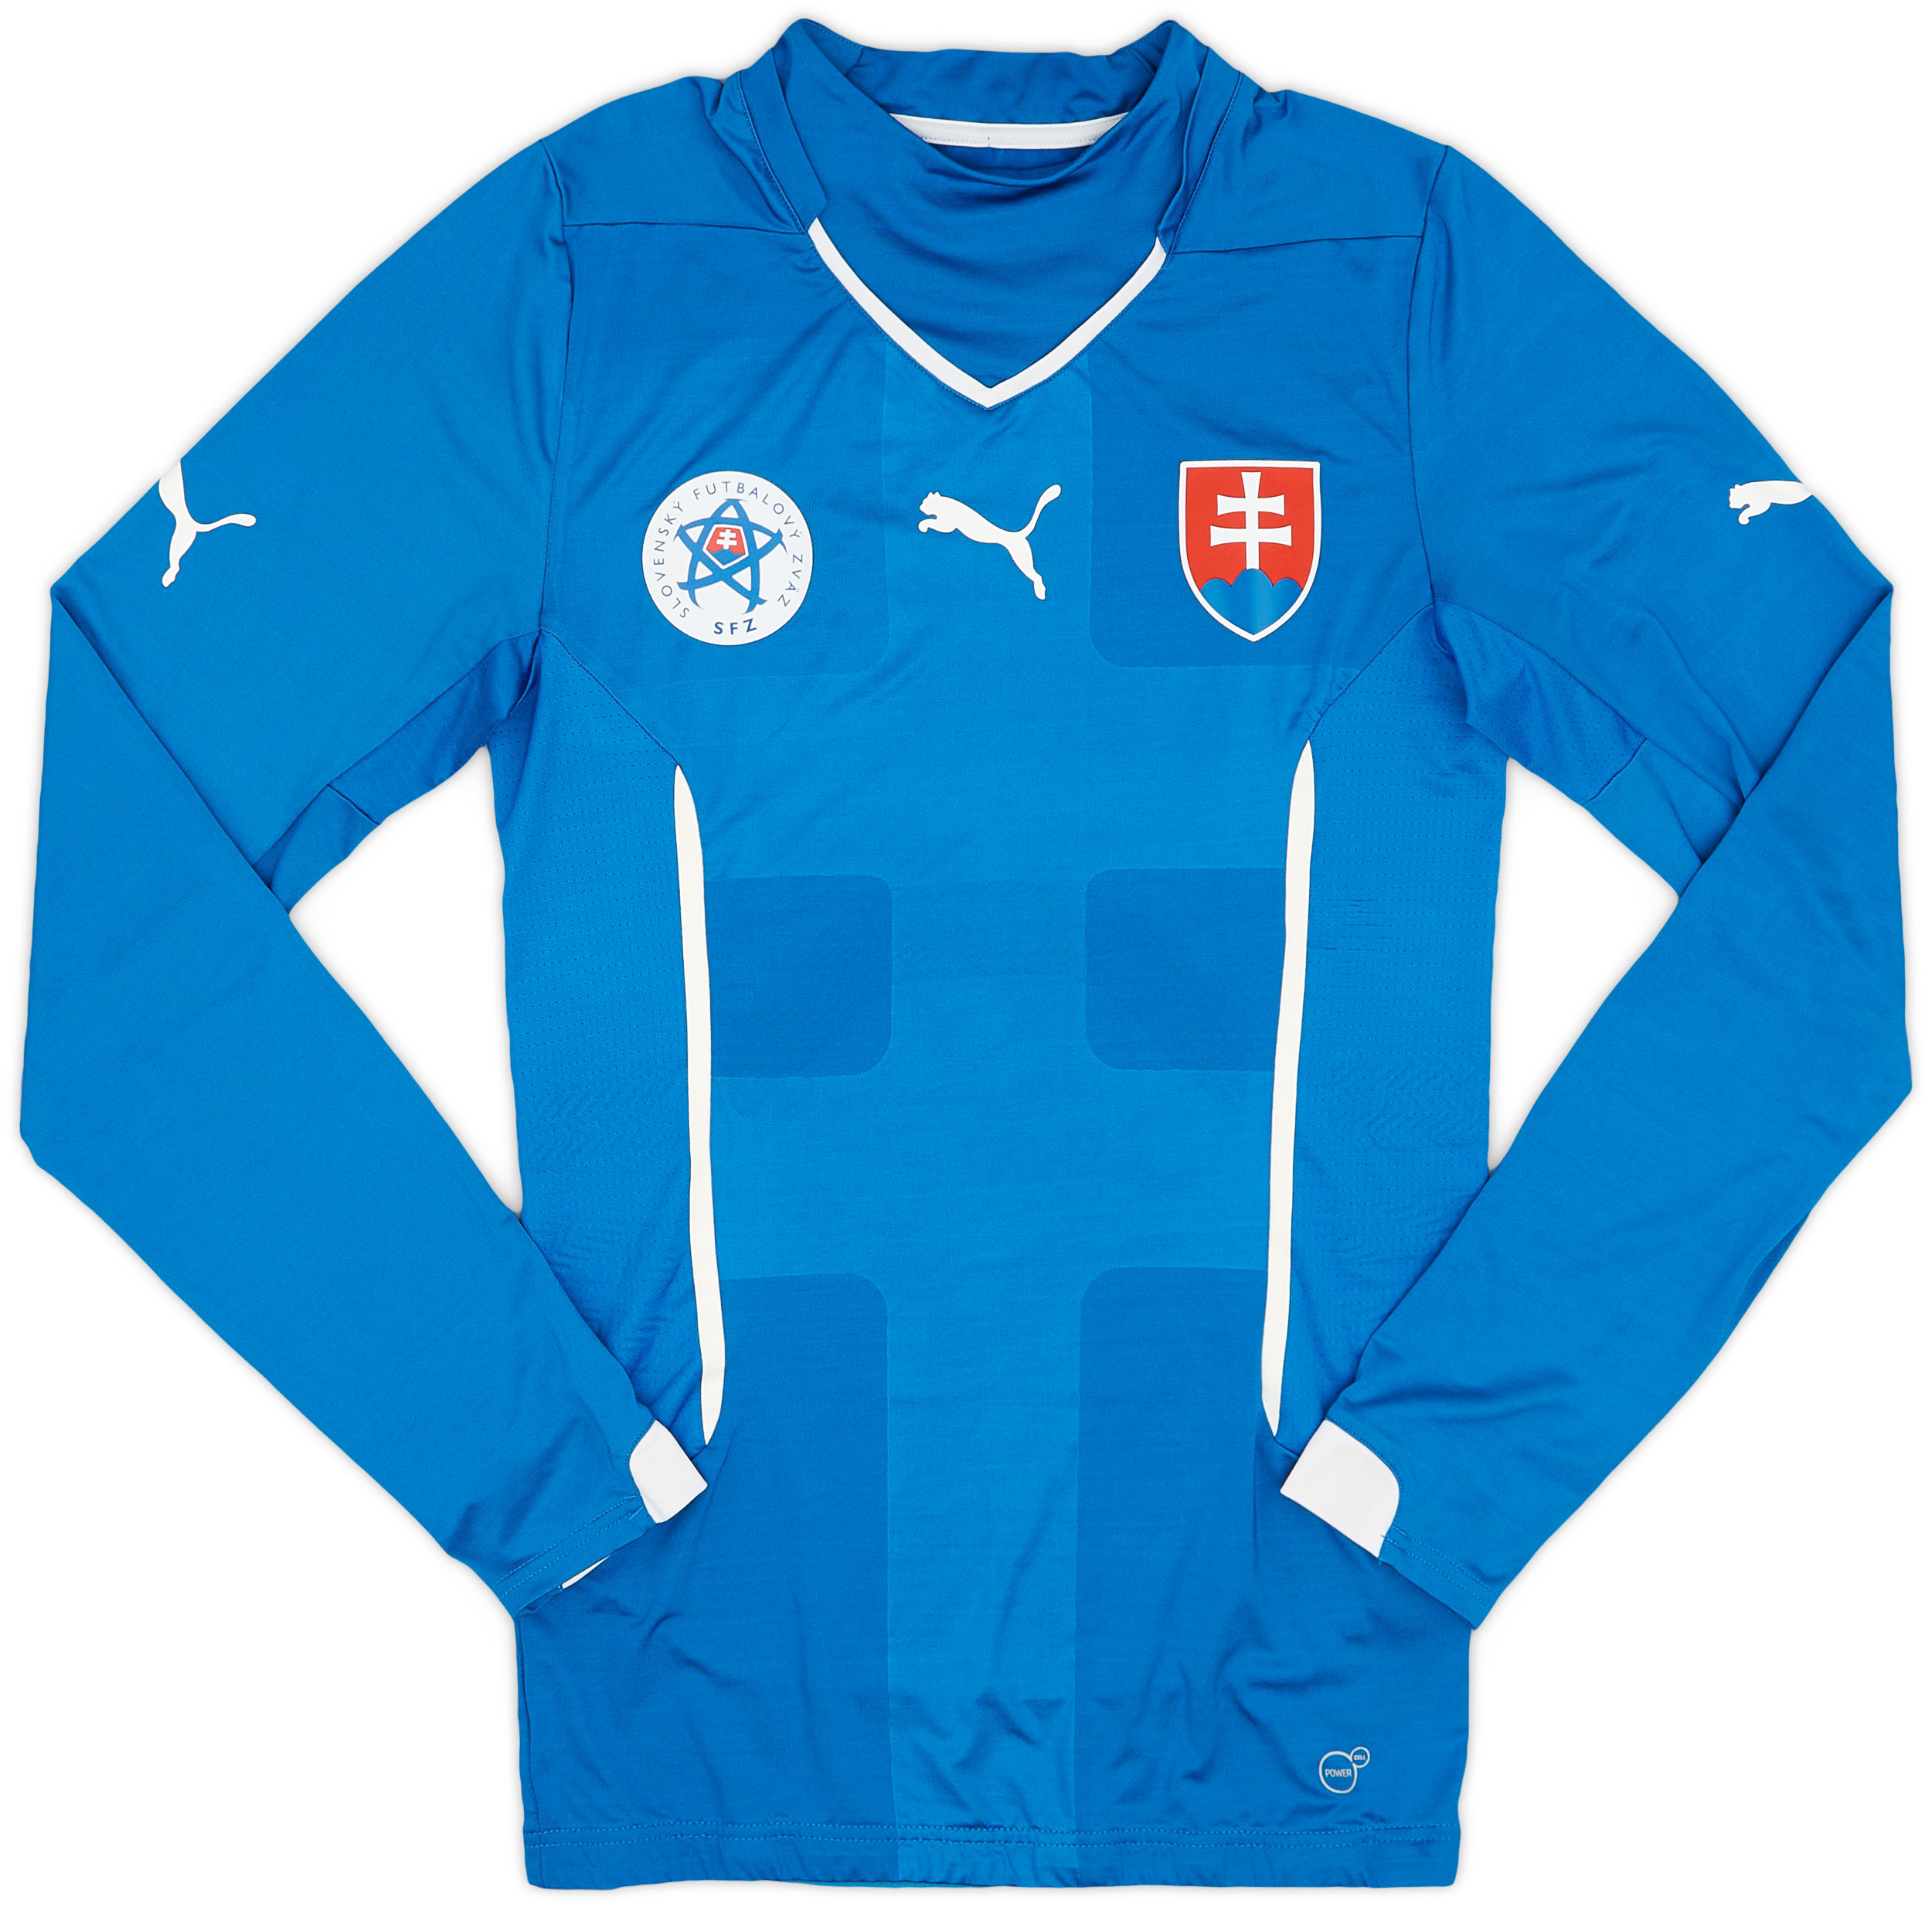 2014-16 Slovakia Authentic (ACTV Fit) Away Shirt - 9/10 - ()